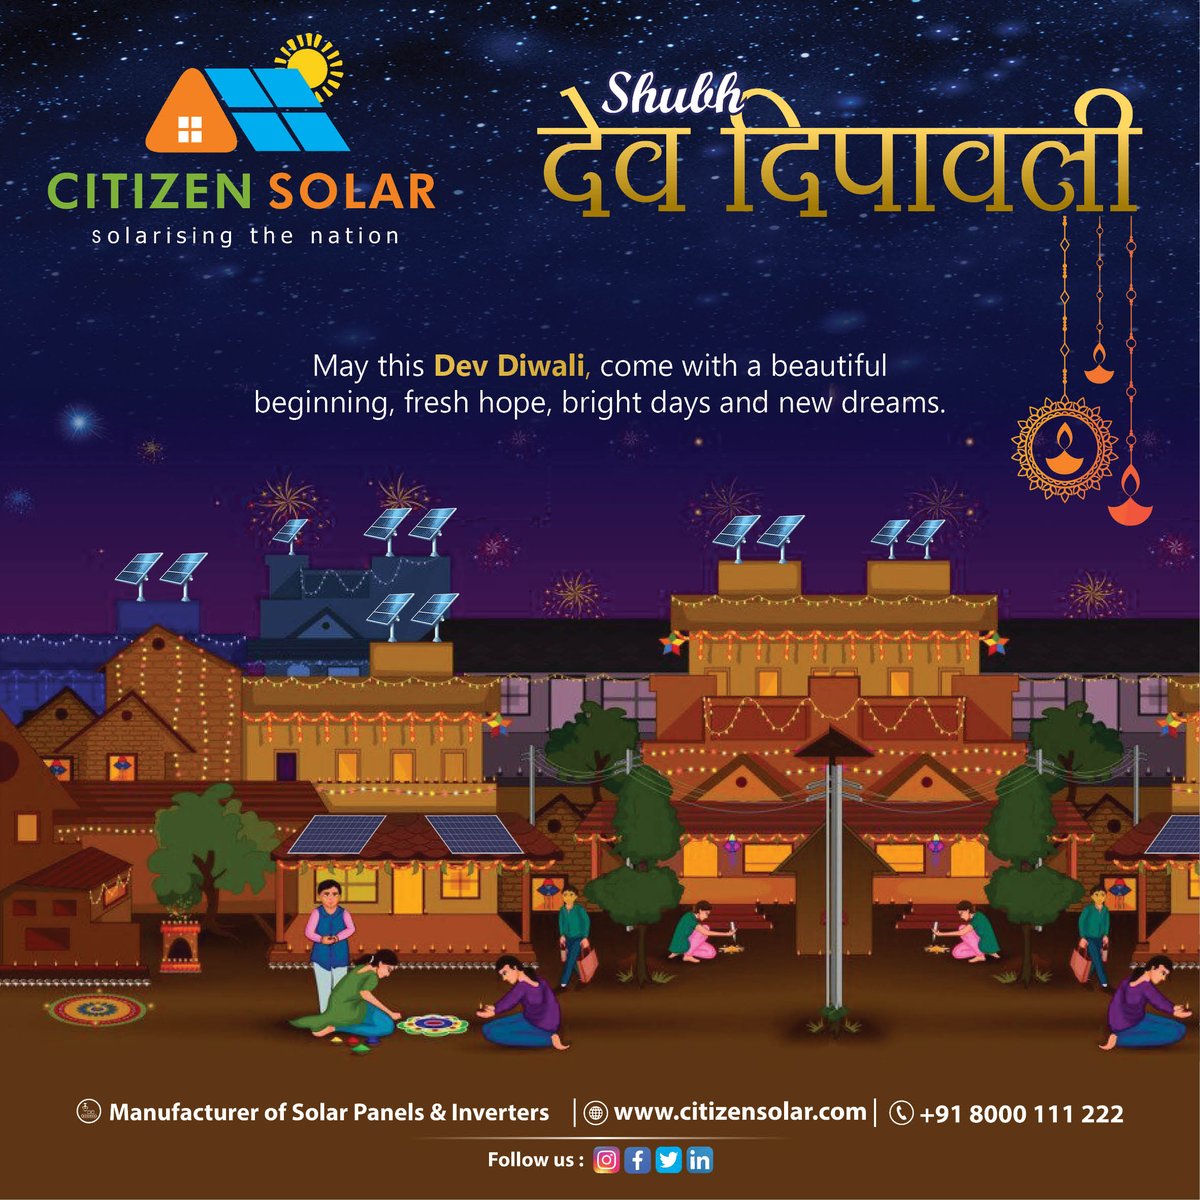 Heartiest Happy Diwali from Citizen Solar May your inner light guide you to happiness and success. 

Lighting Up Lives, One Solar Panel at a Time.

#devdiwali #festivals #gosolar #enjoyfestival #Citizensolar #solarmanufacturing #devdipawali #SolarEnergy #GreenEnergy #lighting